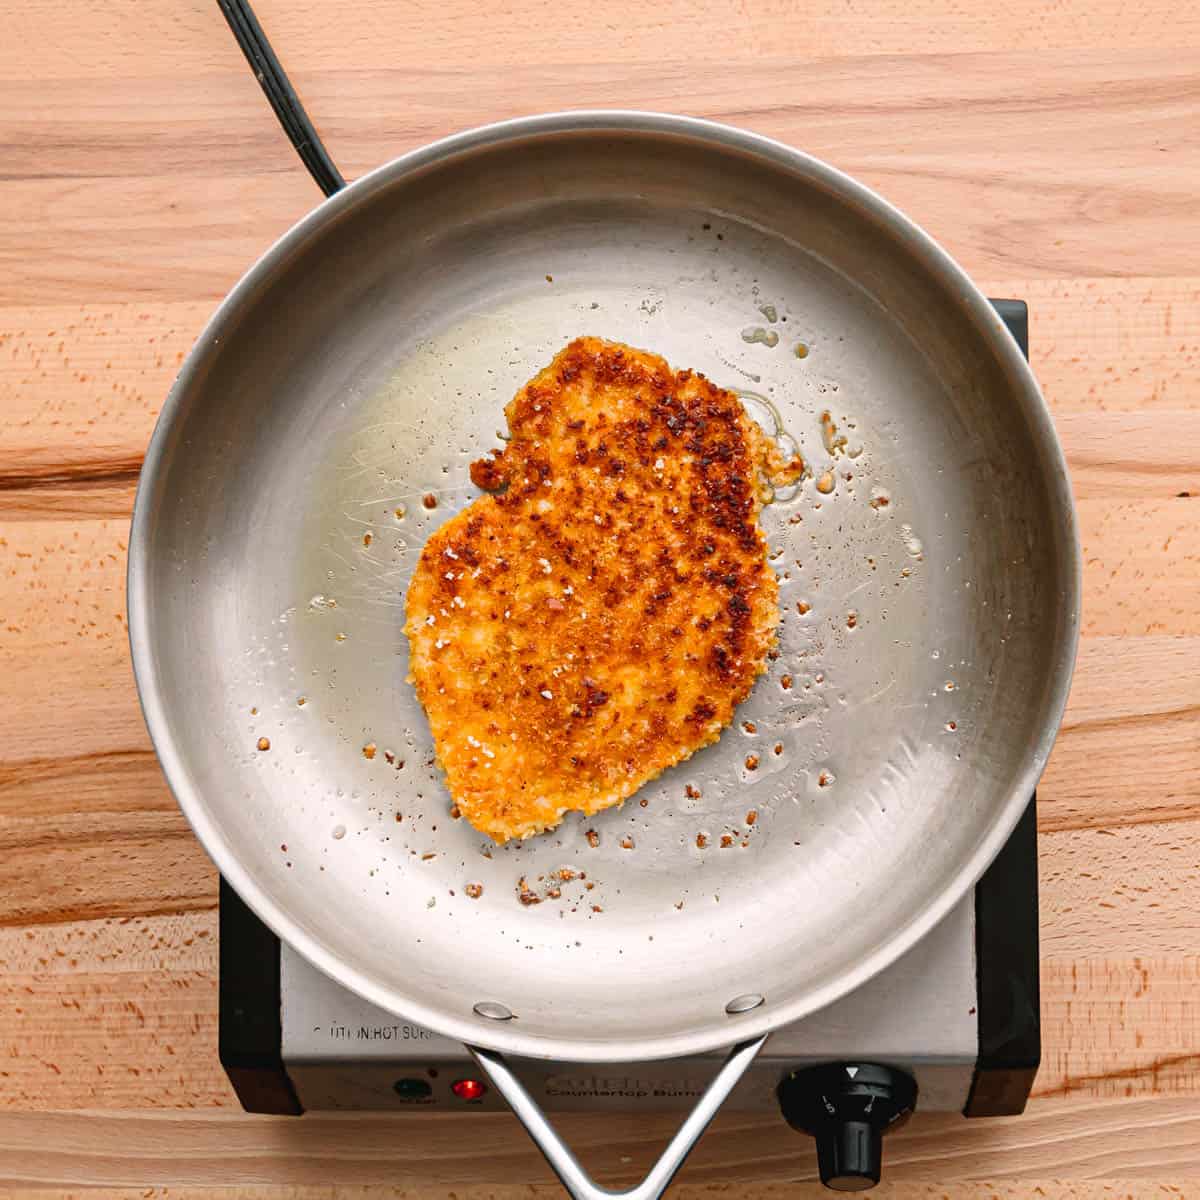 cook the chicken cutlets for about 2 minutes or longer per side, until crispy and golden brown. 